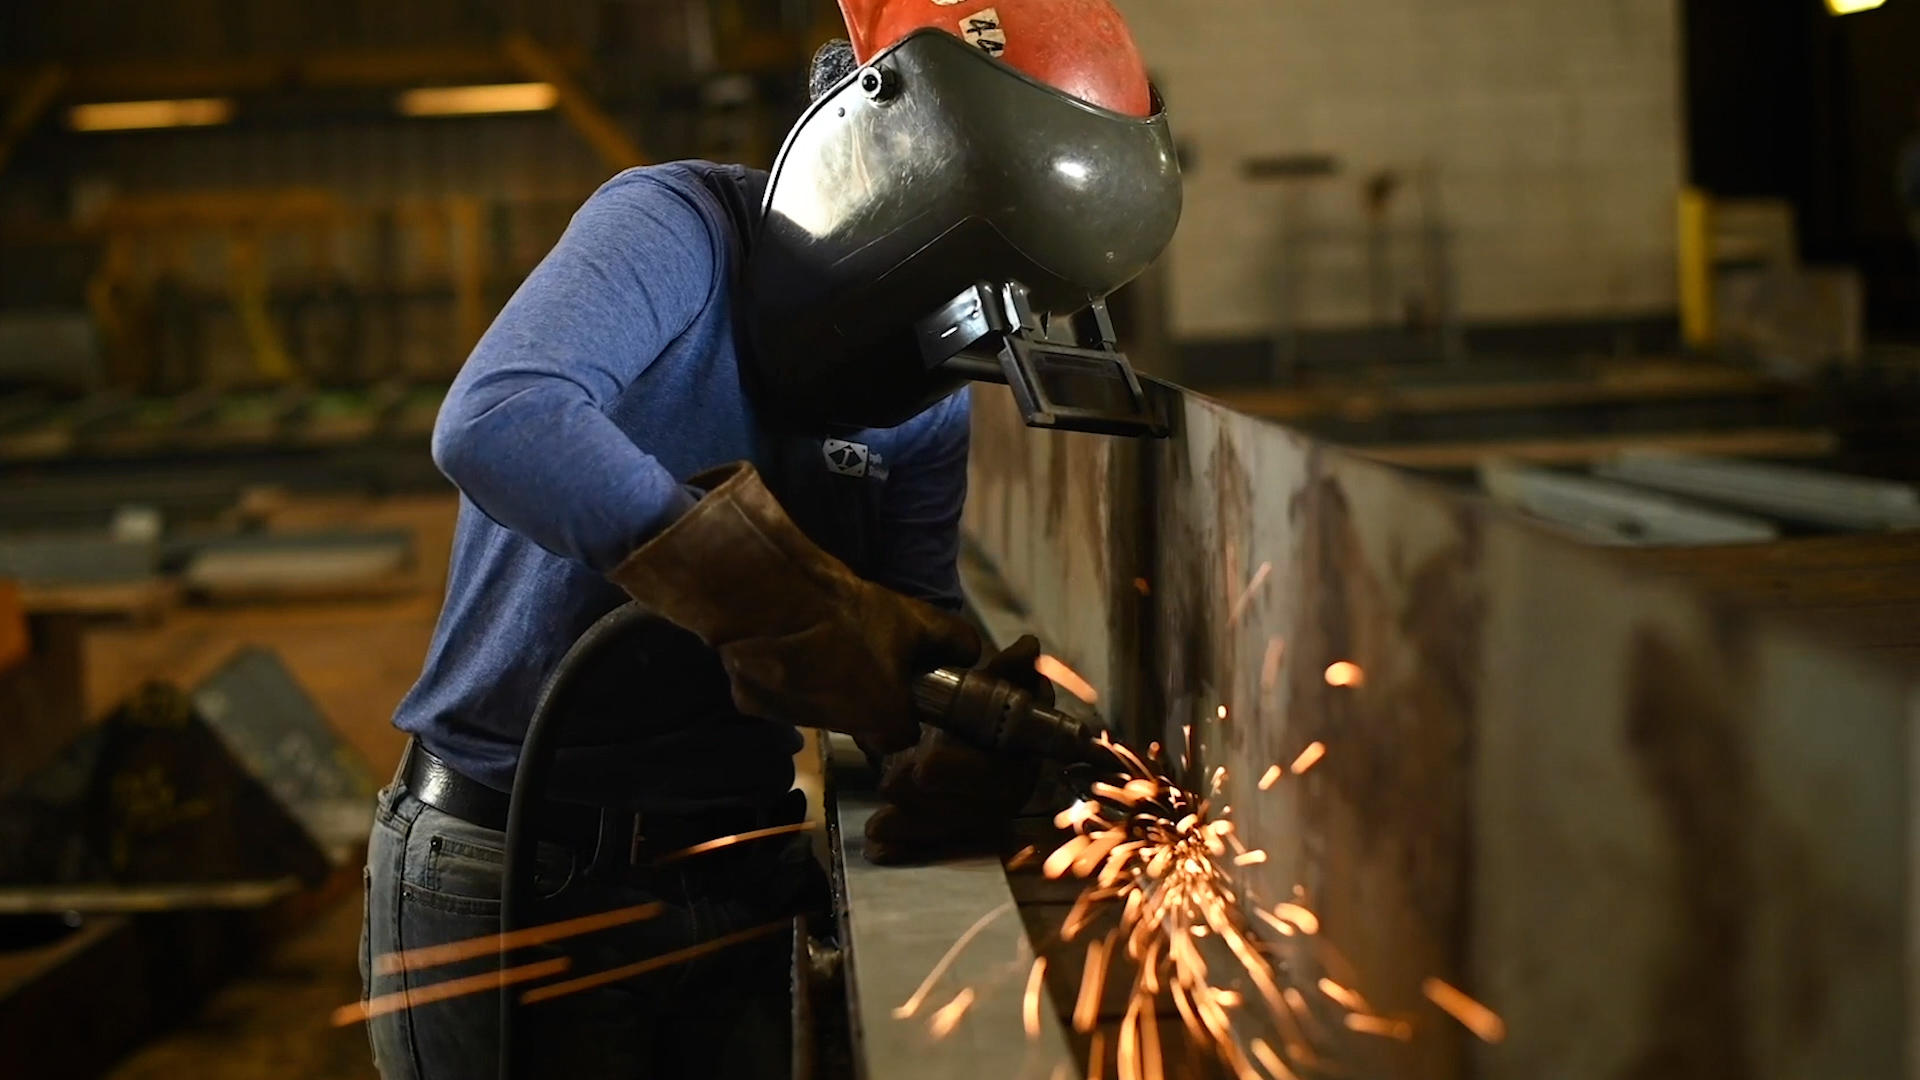 An employee from HII's Ingalls Shipbuilding division grinds metal during construction of a ship. With over 500 different jobs, visit buildyourcareer.com to search job descriptions, job listings, and apply online.